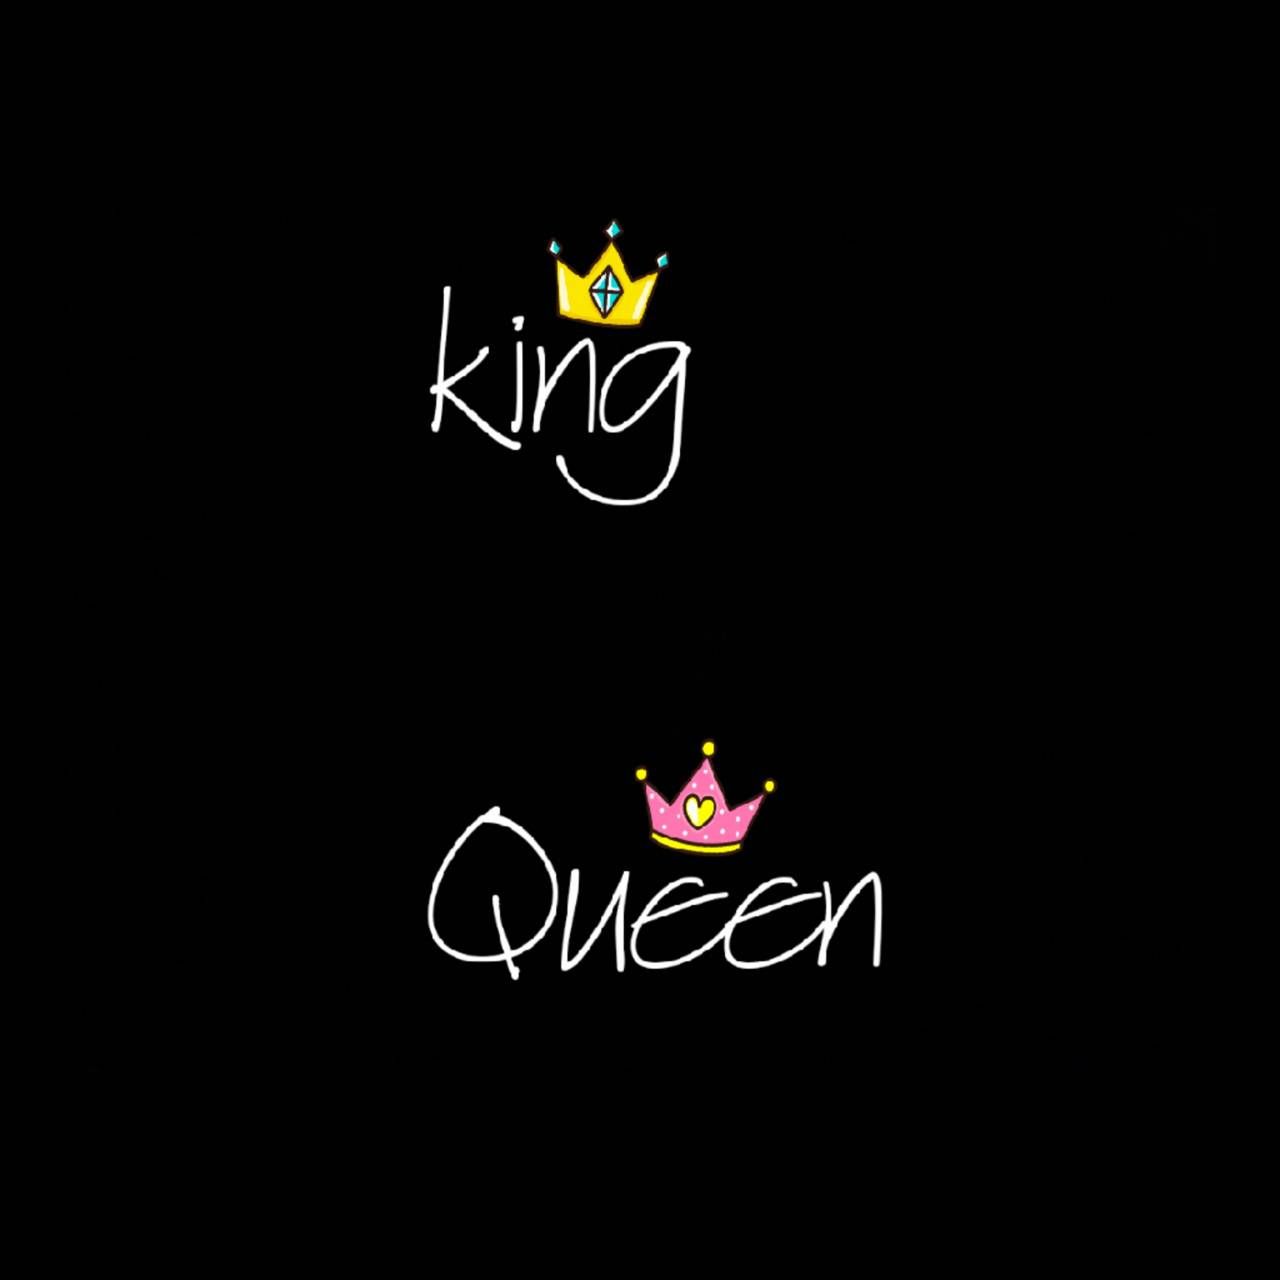 100+] King And Queen Wallpapers